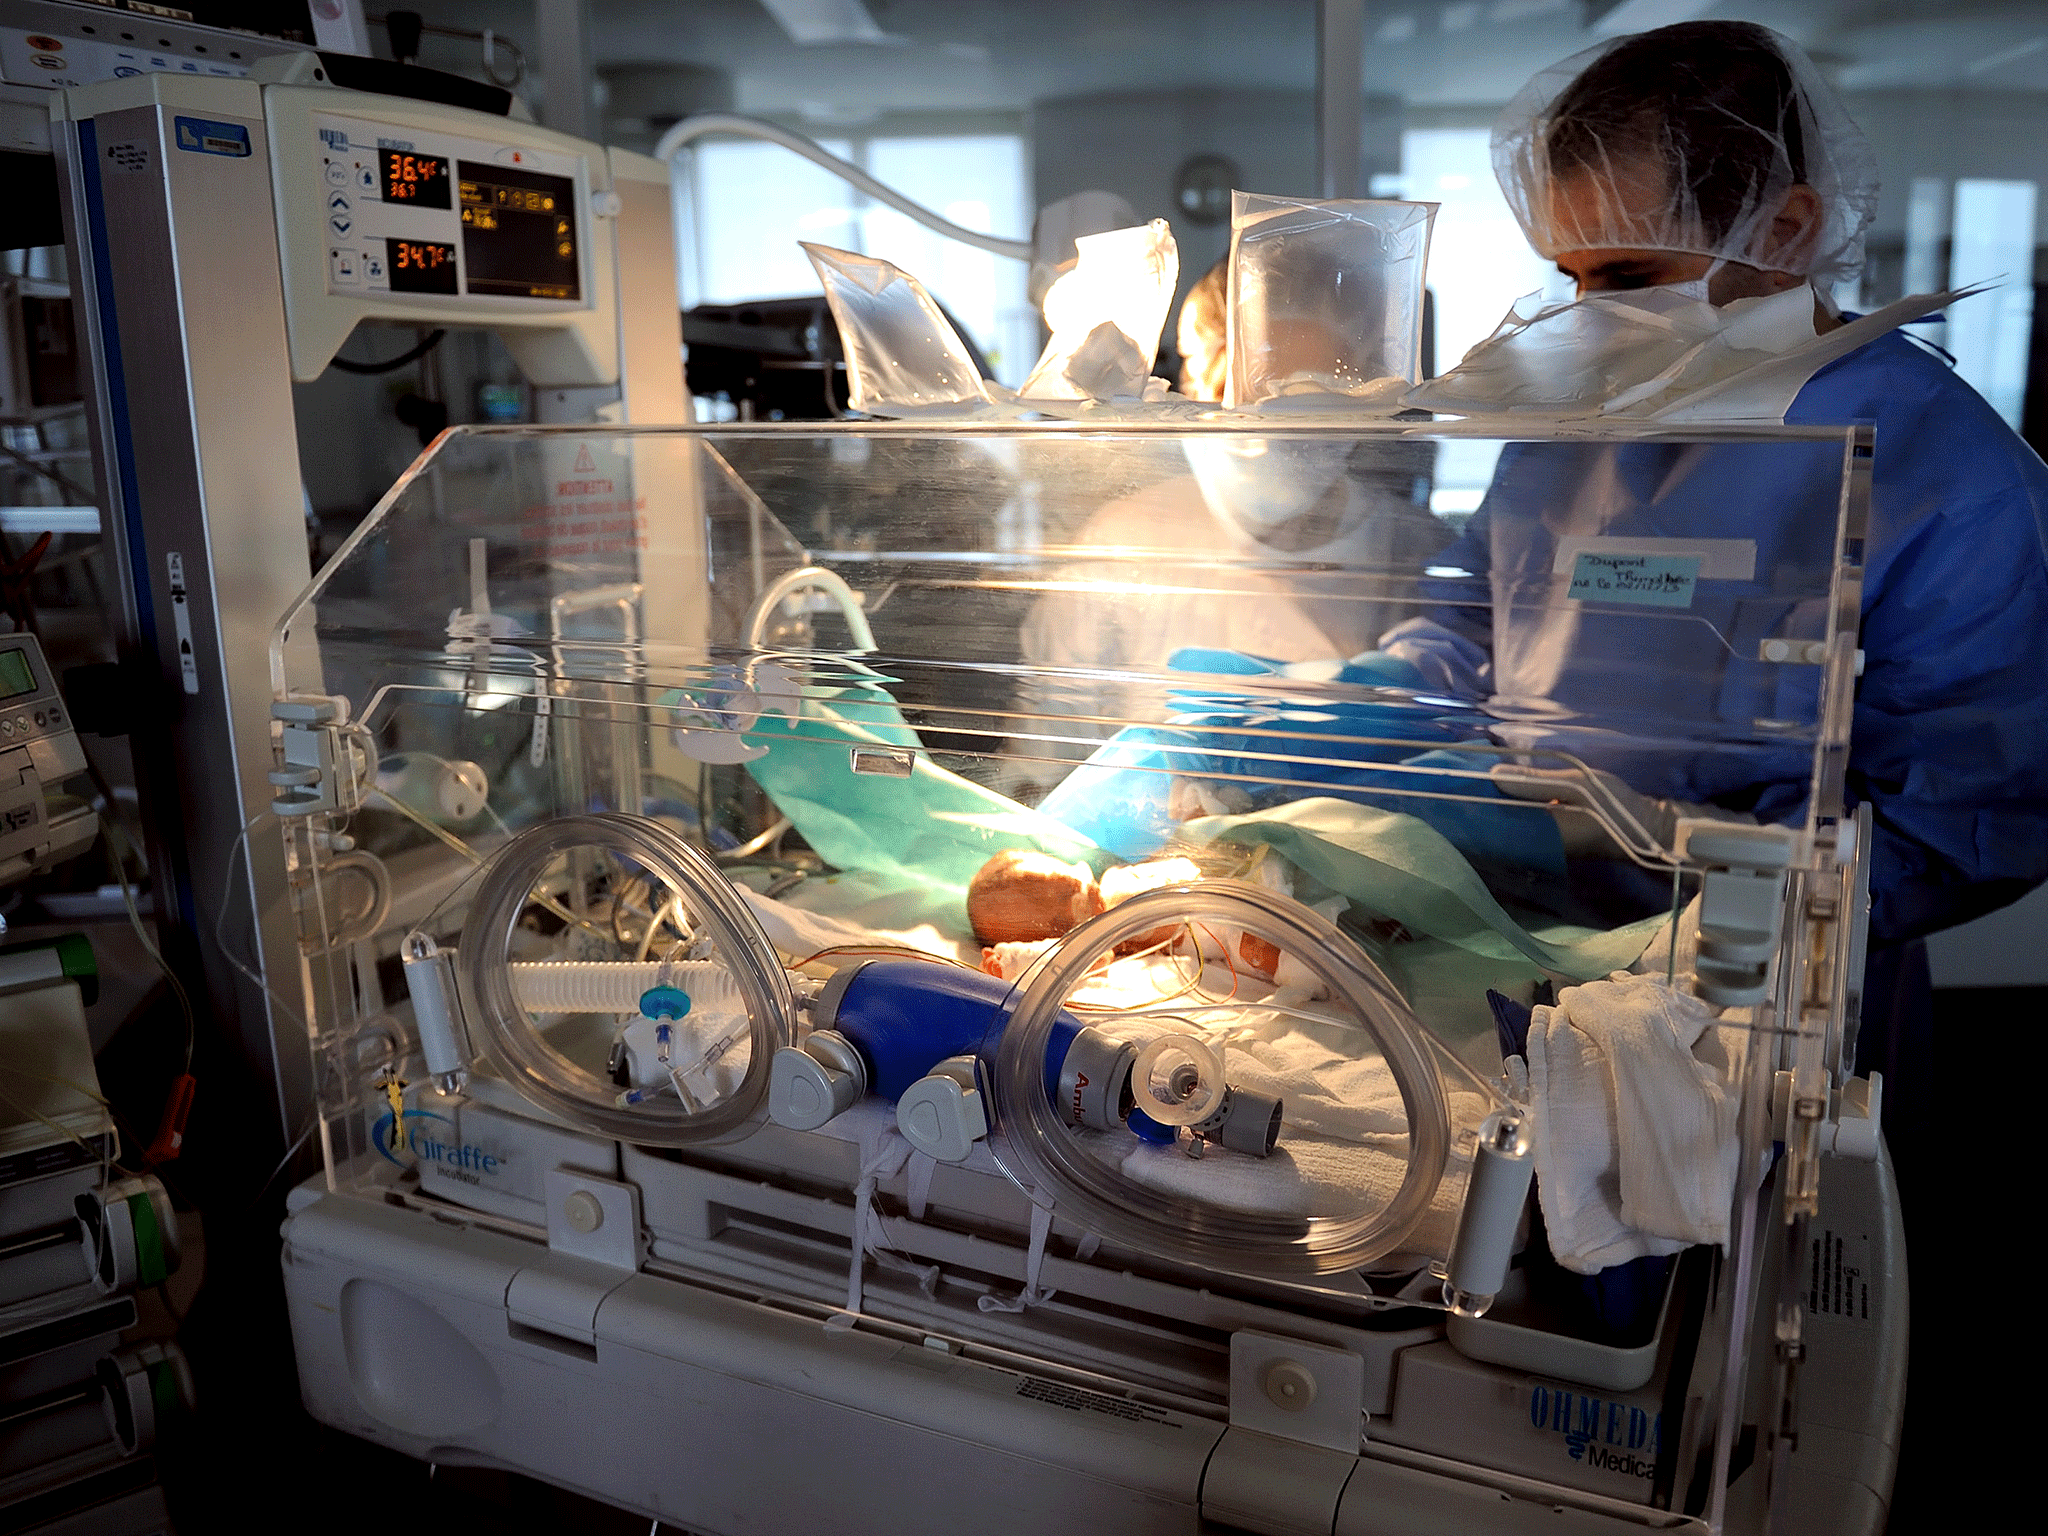 I learnt everything I need to know about the NHS when I gave birth to my son at 16 weeks